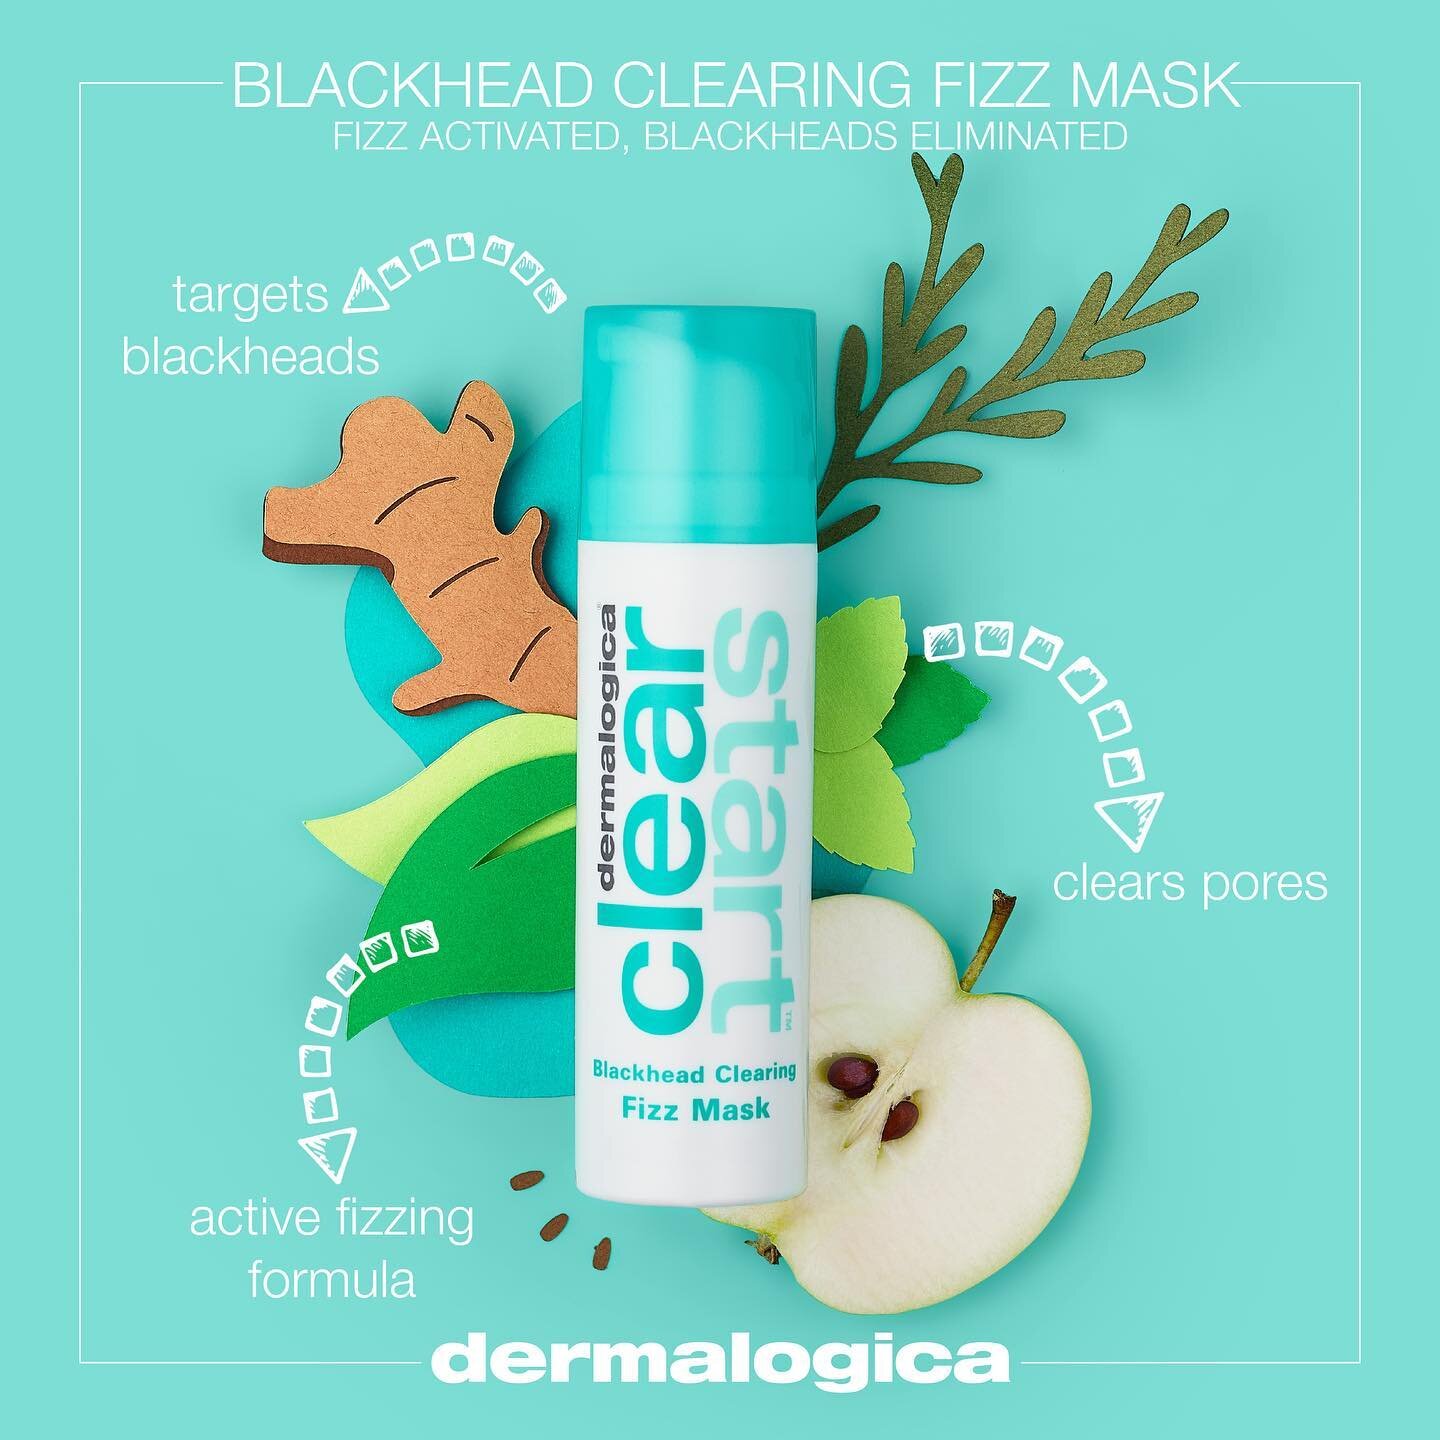 FIZZ ON, BLACKHEADS GONE👋🏼 

BLACKHEAD CLEARING FIZZ MASK🍏 &mdash; A unique fizzing technology that activates upon application to open pores, help dissolve congestion + facilitate blackhead clearing. 

This Mask contains ingredients like Sulfur, K